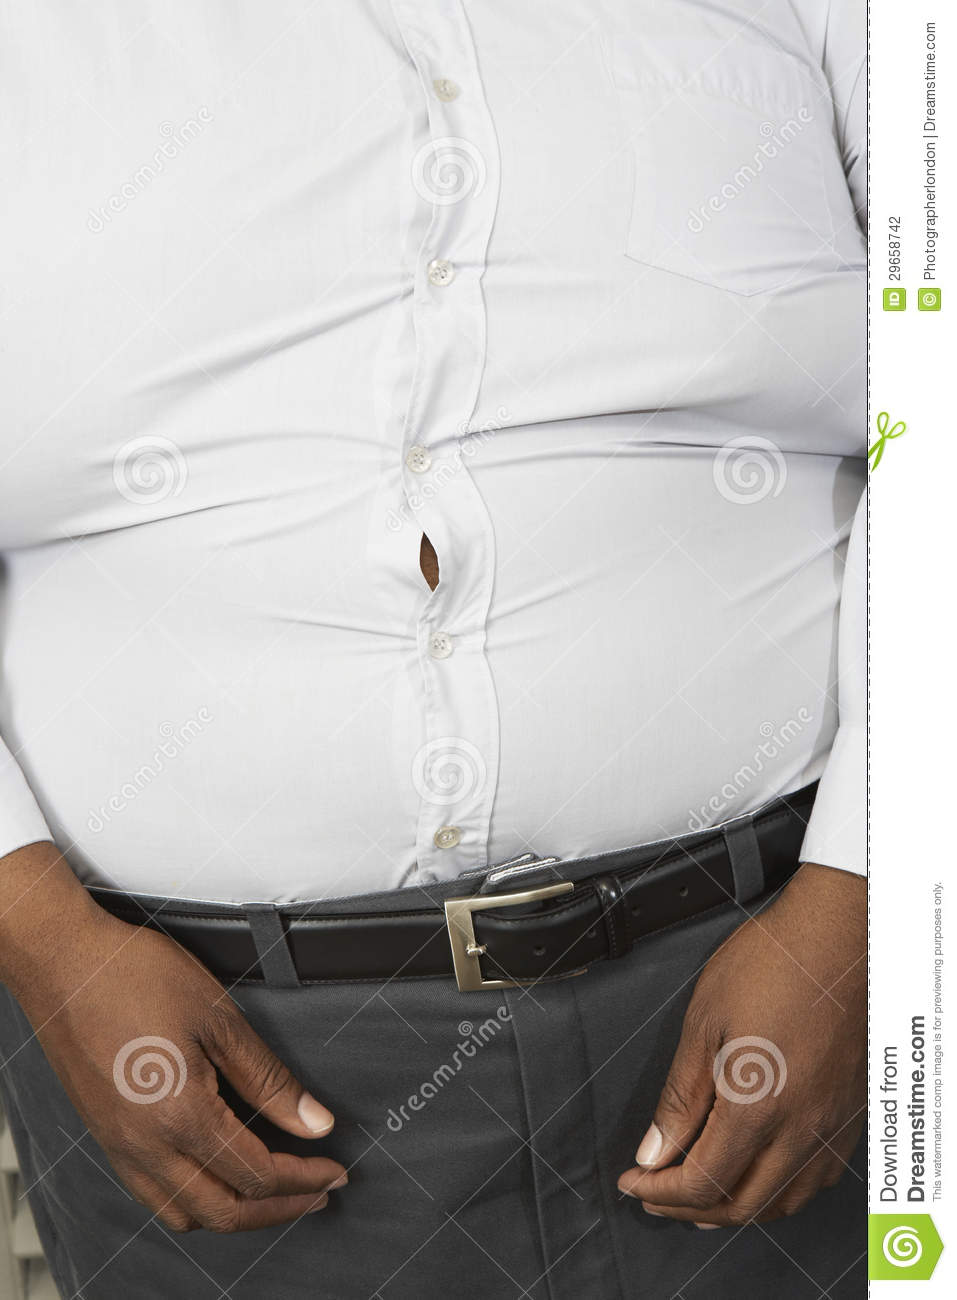 Midsection Of An Obese Man Wearing Tight Formal White Shirt